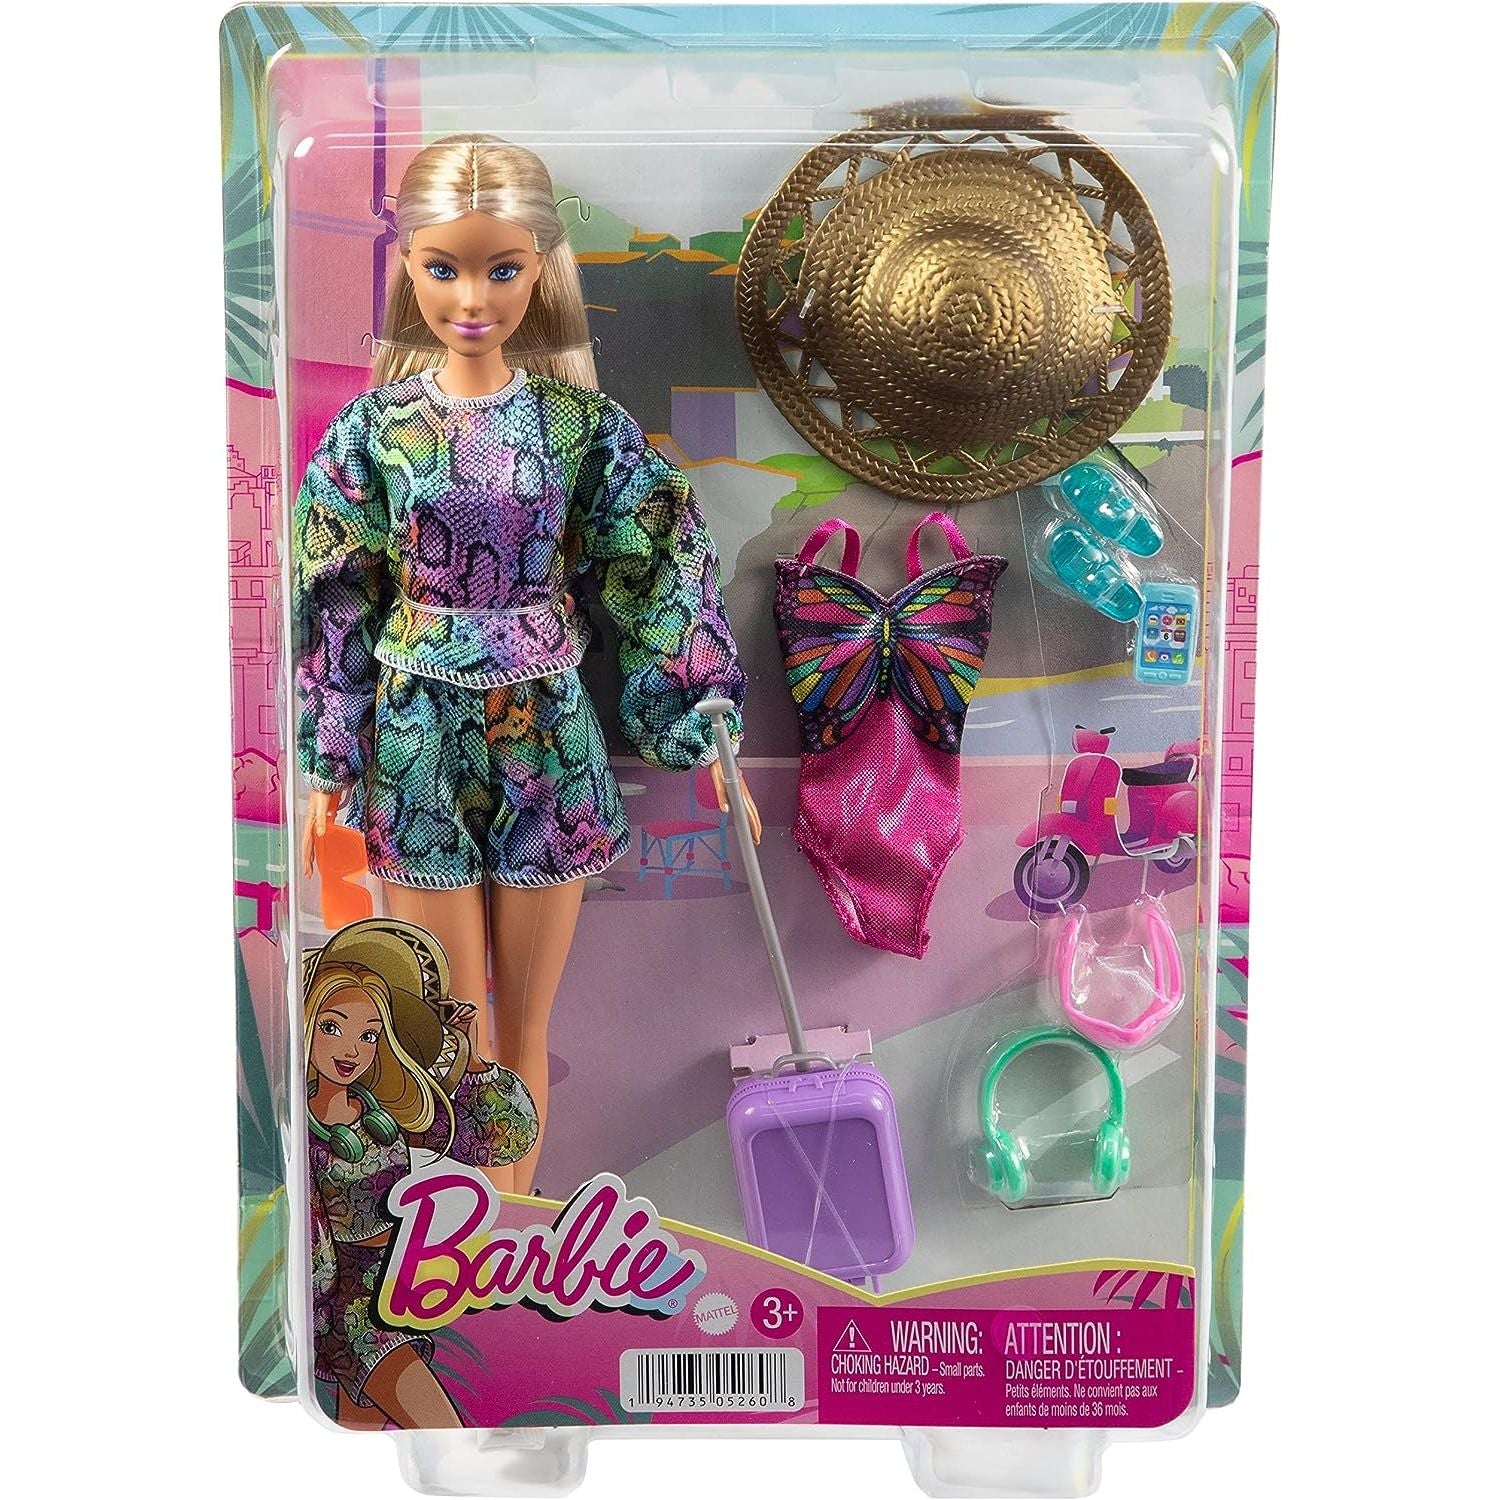 Barbie Doll & Accessories, Holiday Fun Summer Travel Doll with Rainbow Jogger Top and Shorts, Swimsuit, Luggage and More